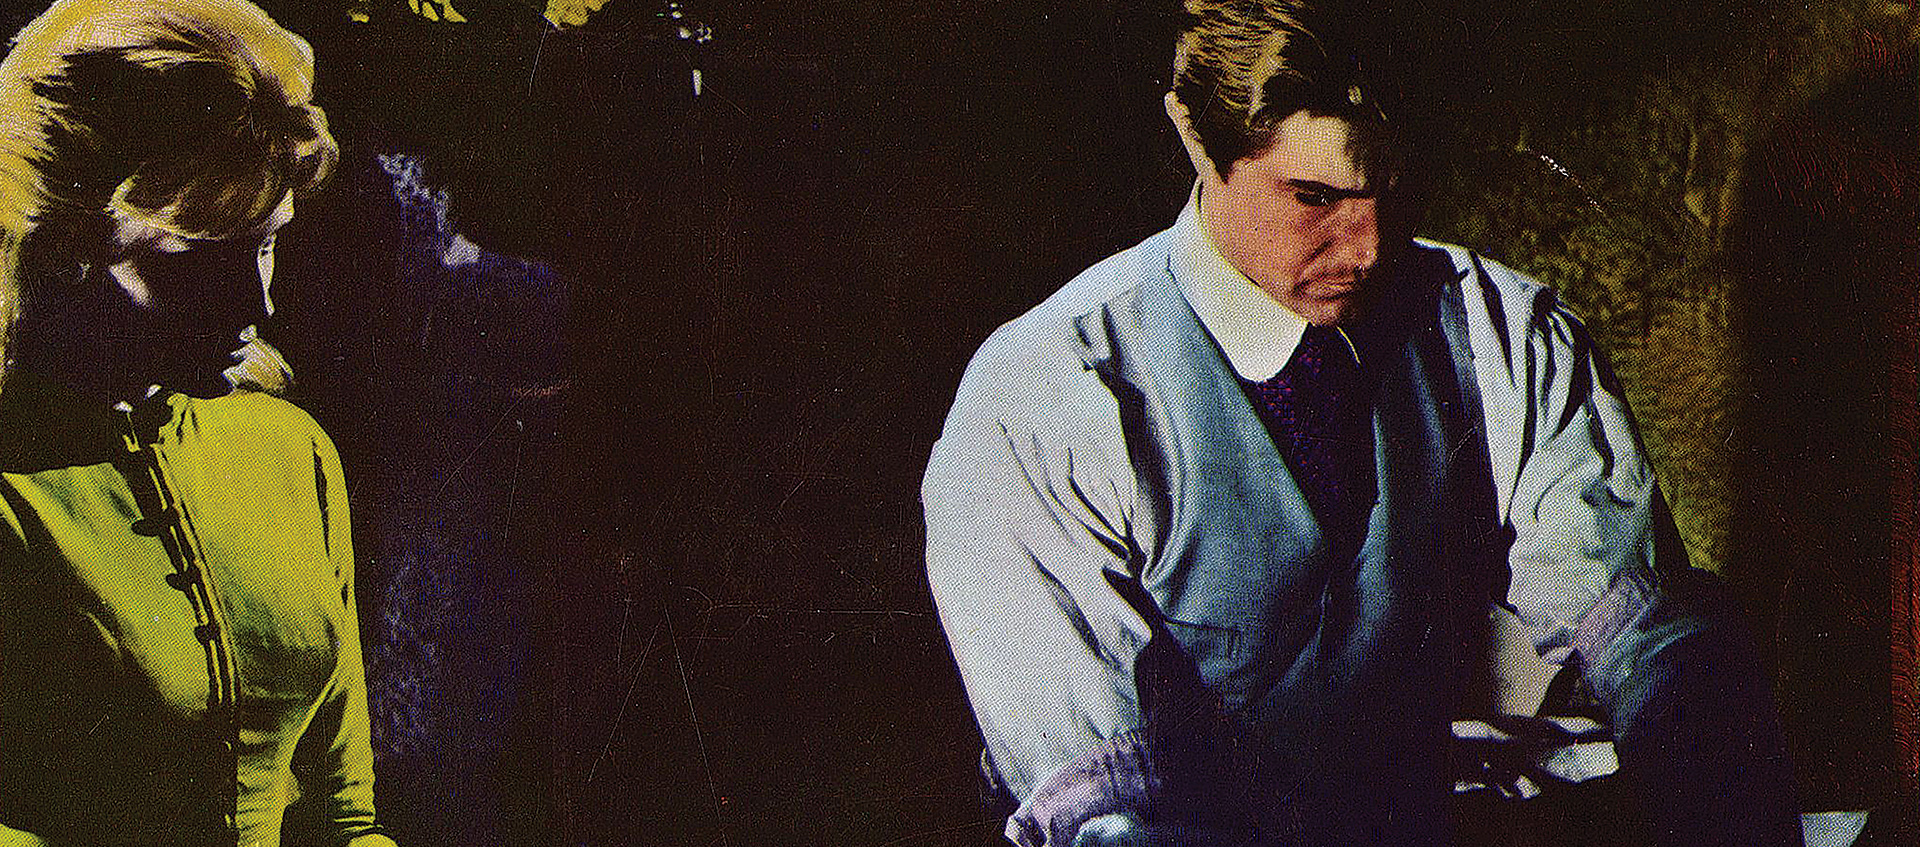 Kill, Baby...Kill film still with a man and women featured in saturated color